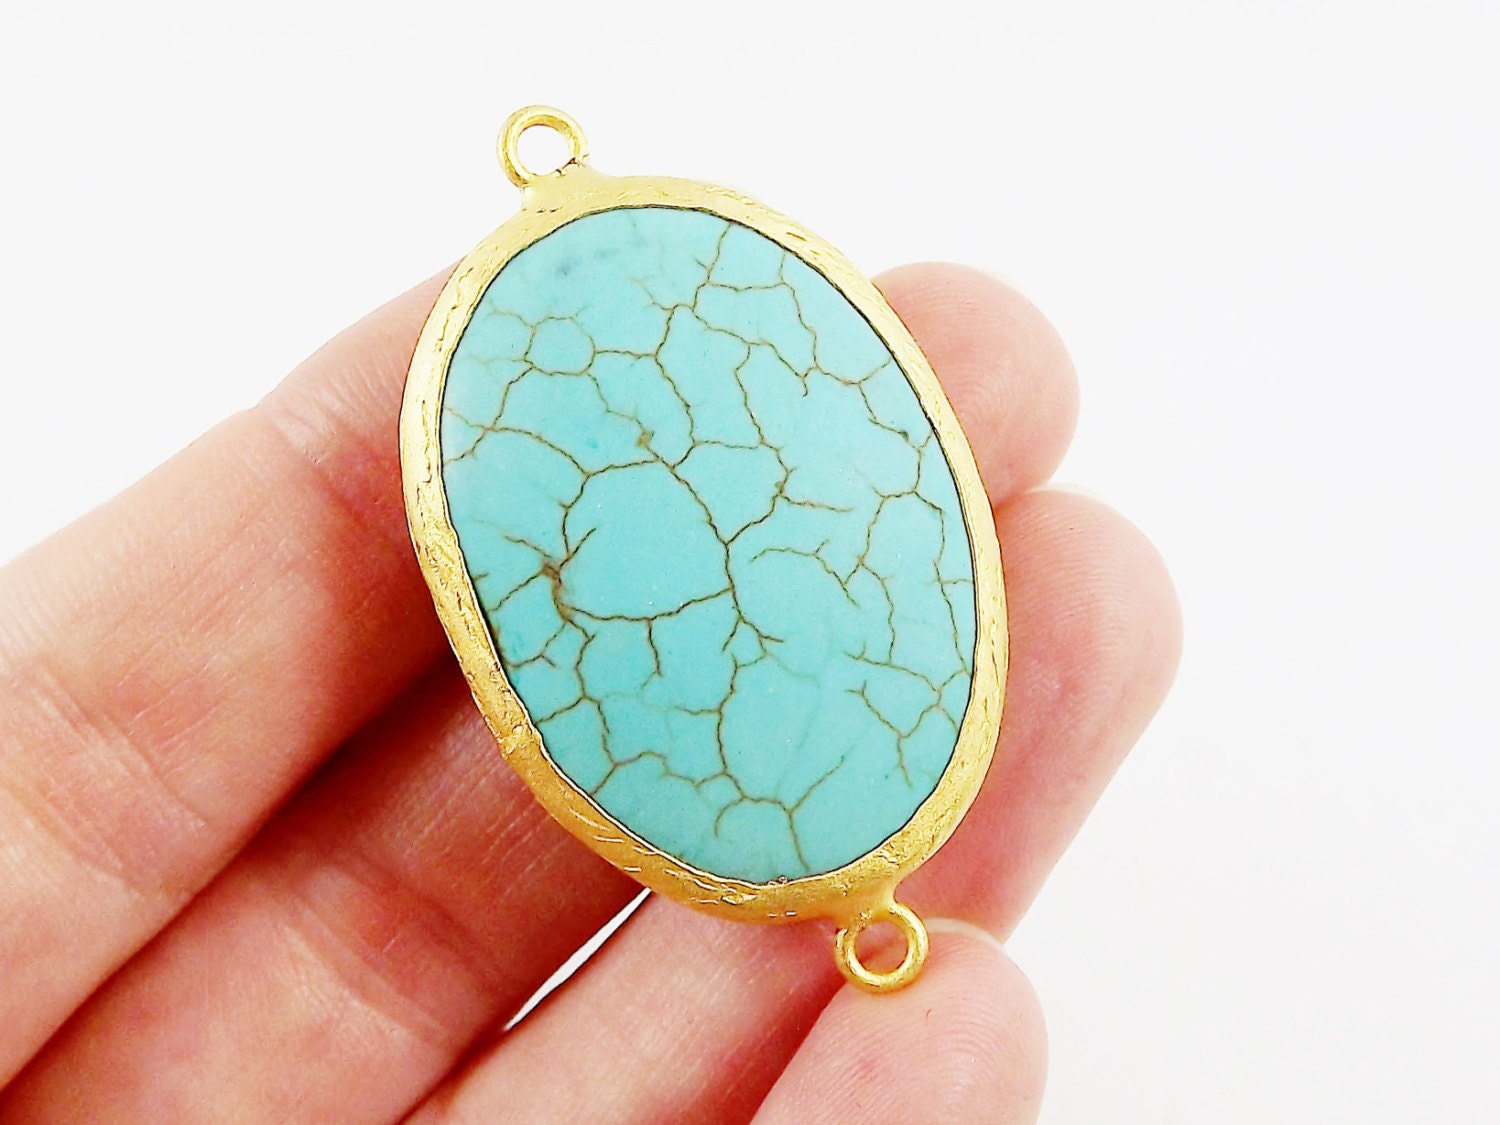 36mm Oval Smooth Turquoise Stone Connector - 22k Matte Gold Plated Bezel - 1pc